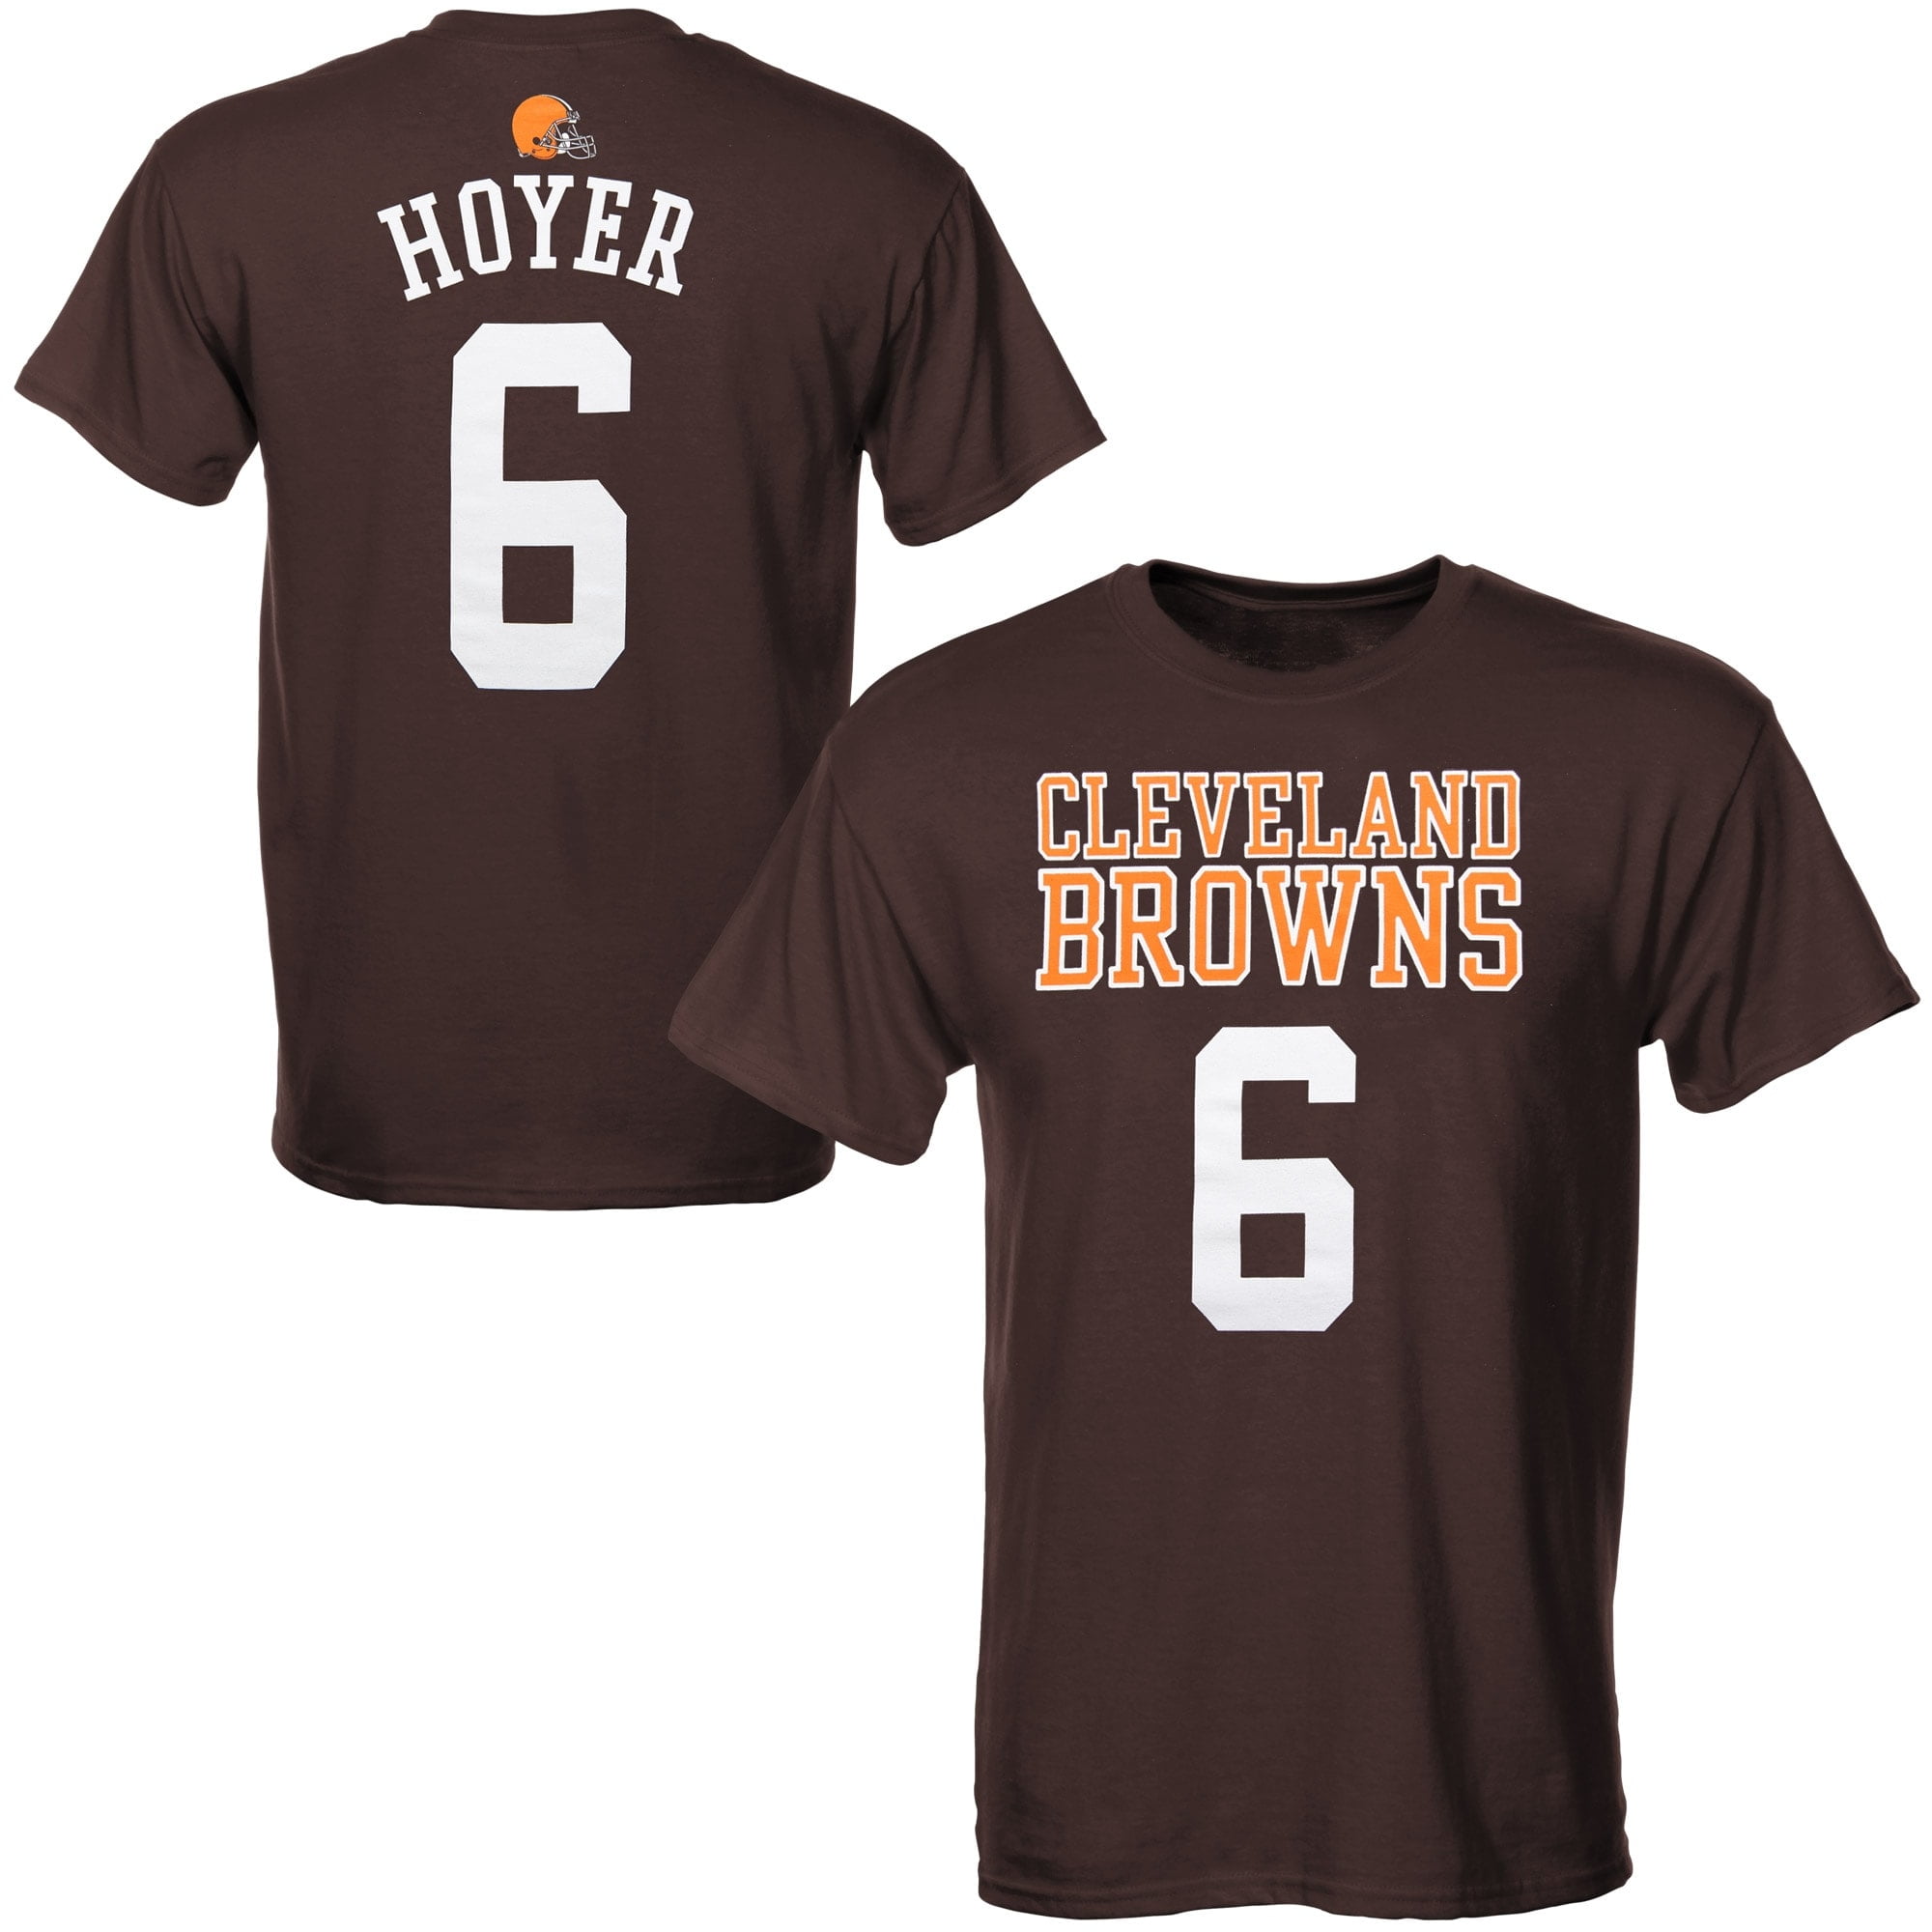 brian hoyer cleveland browns jersey